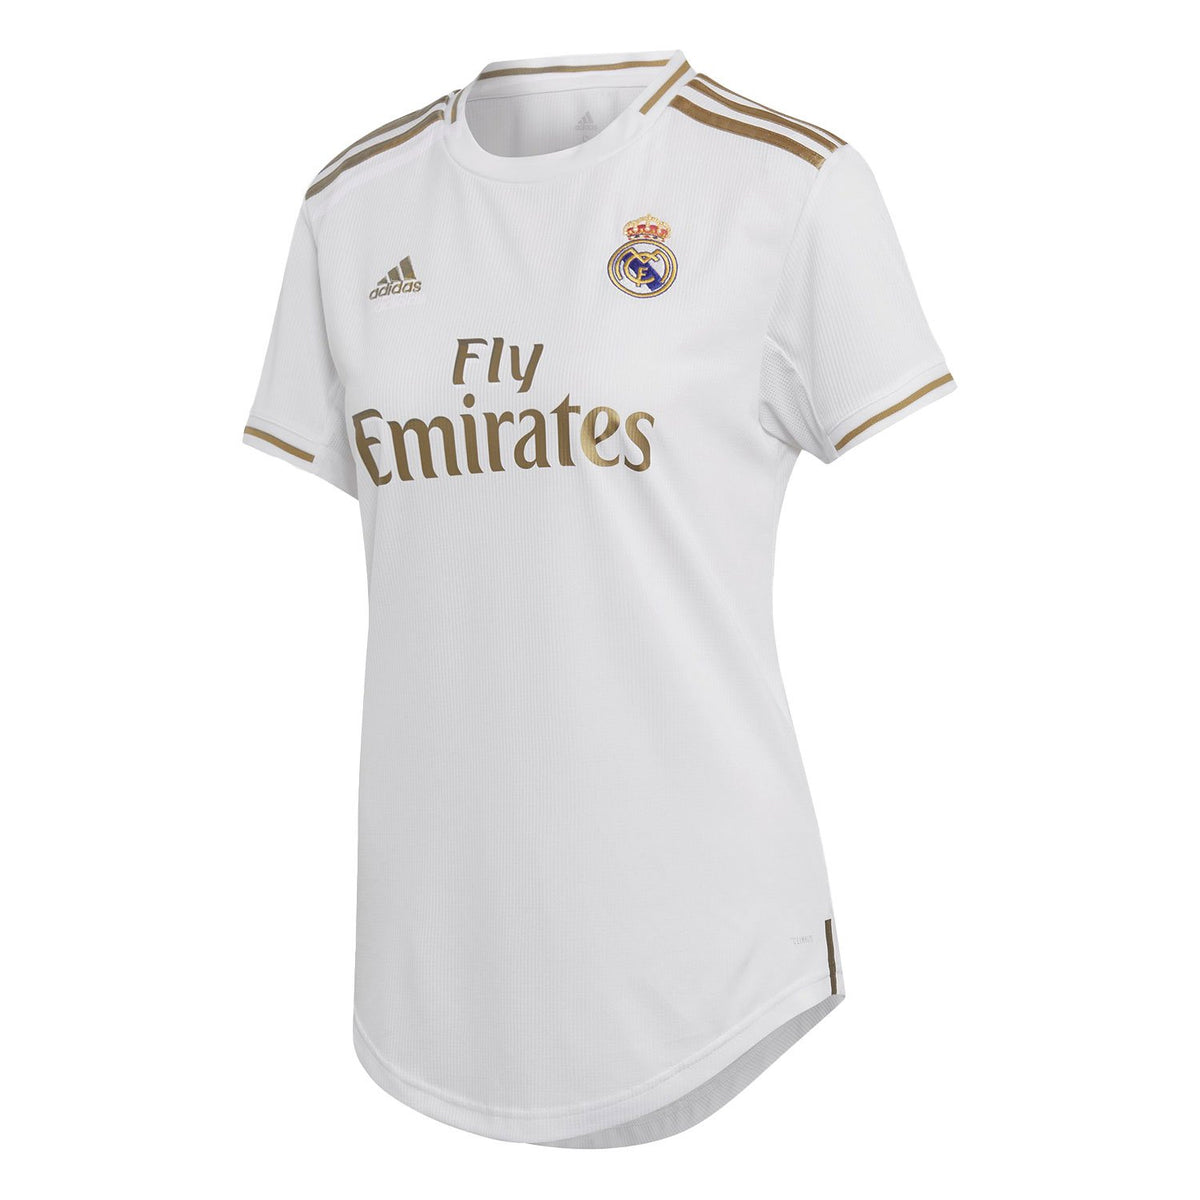 fly emirates jersey womens